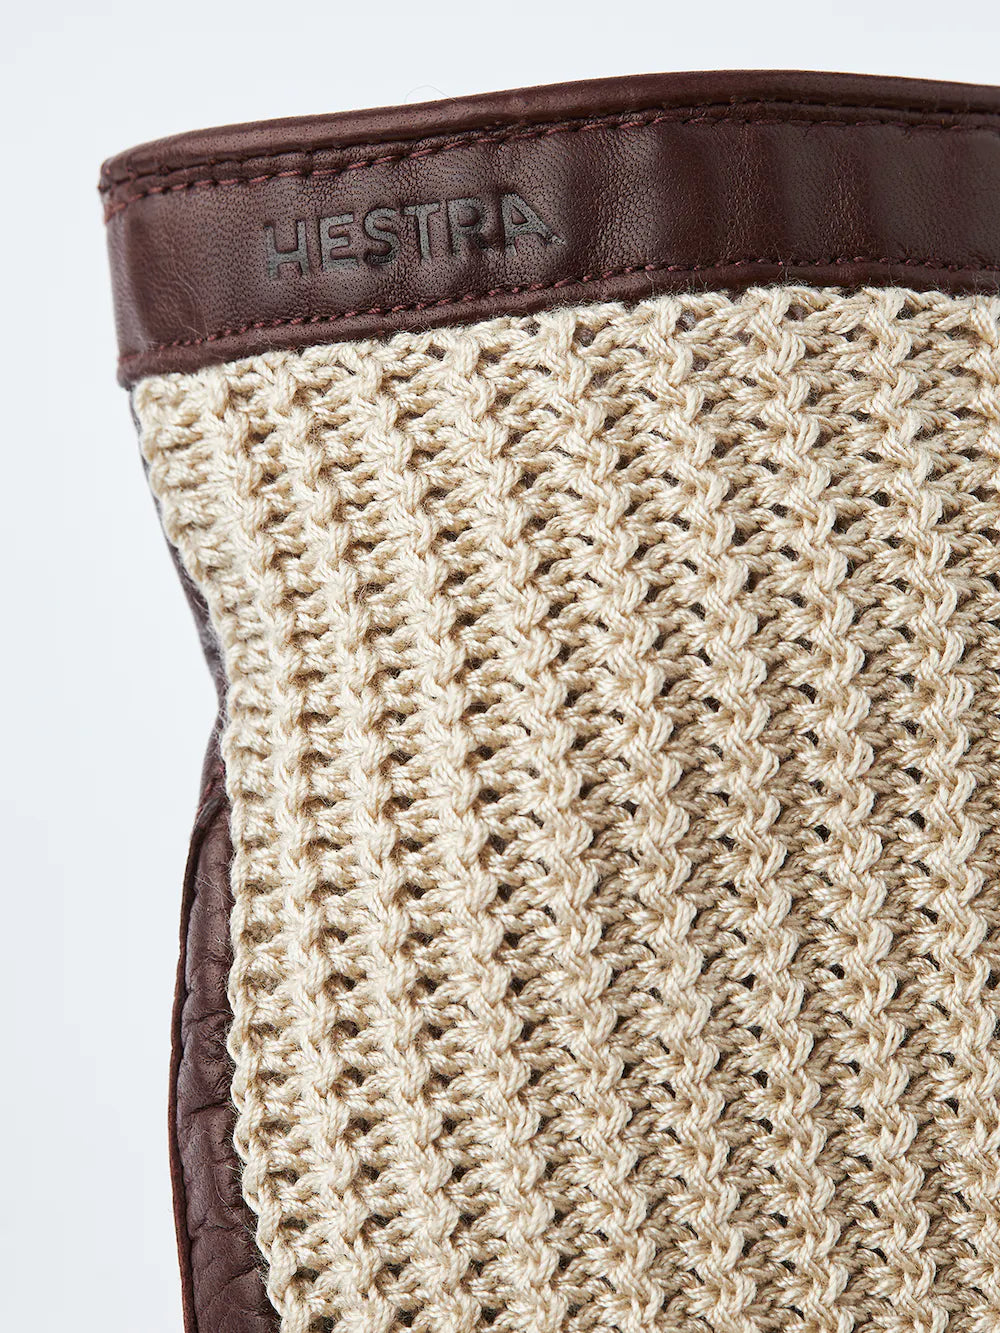 Lined men’s leather glove with crochet detail